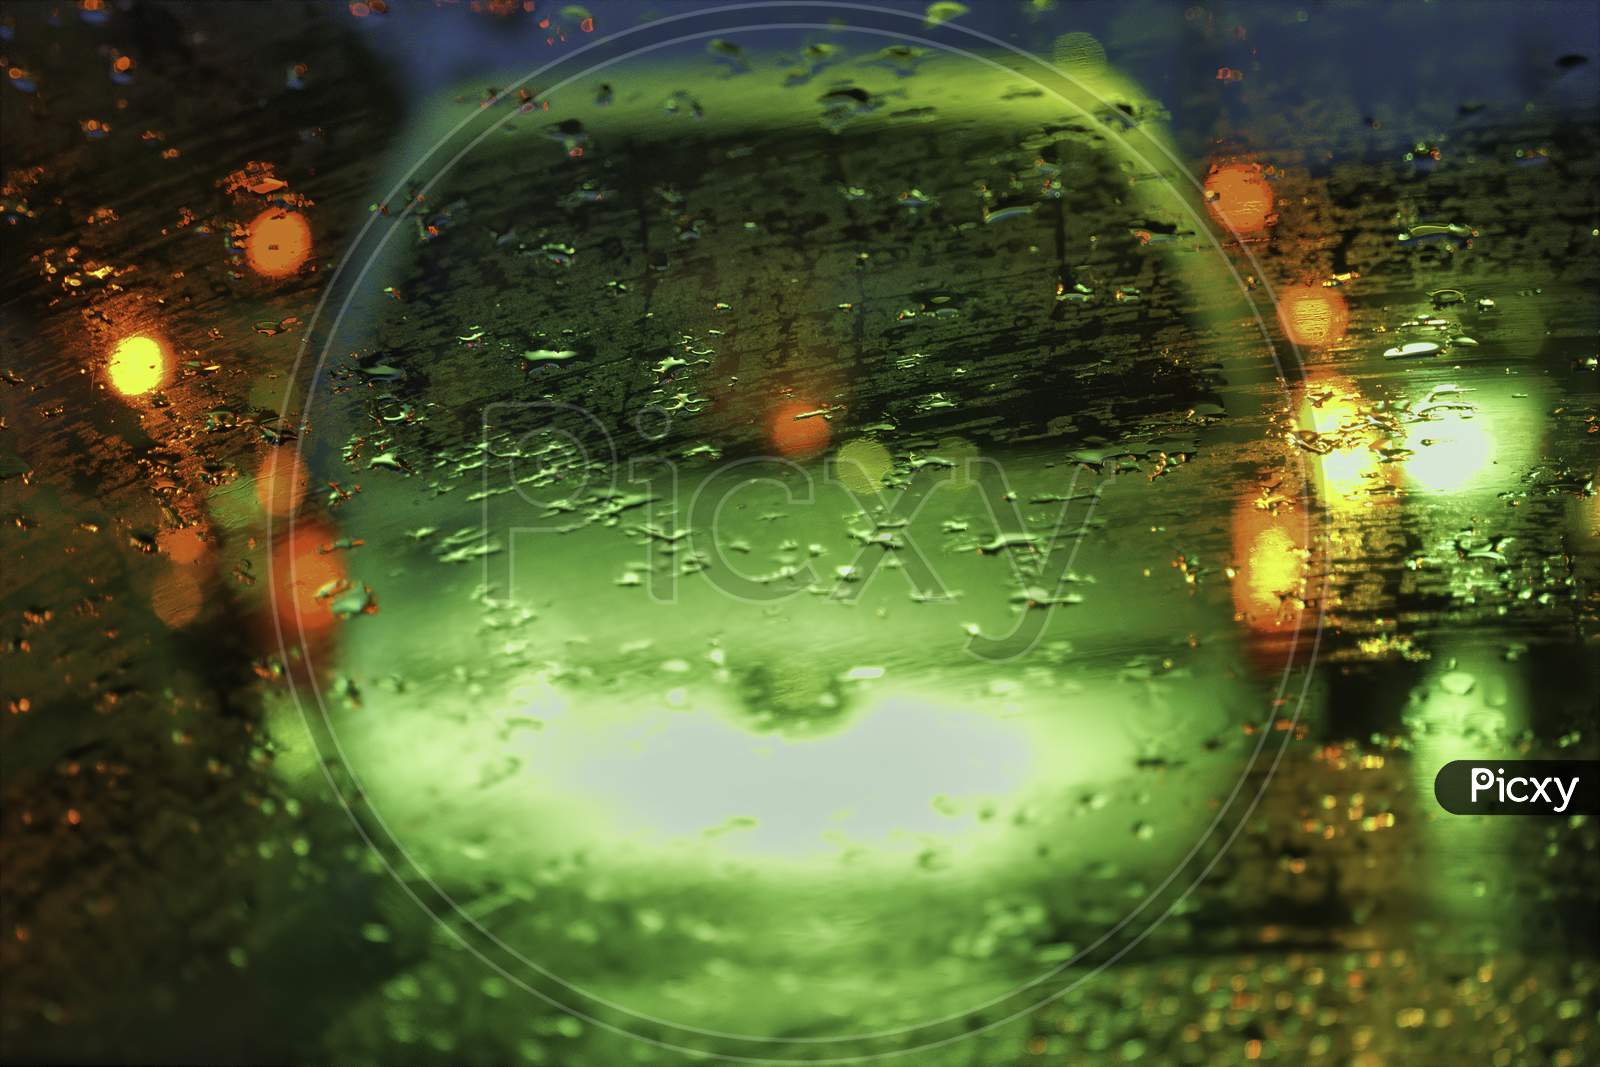 An Abstract Art Image Of Raindrops On A Glass Against Street Light